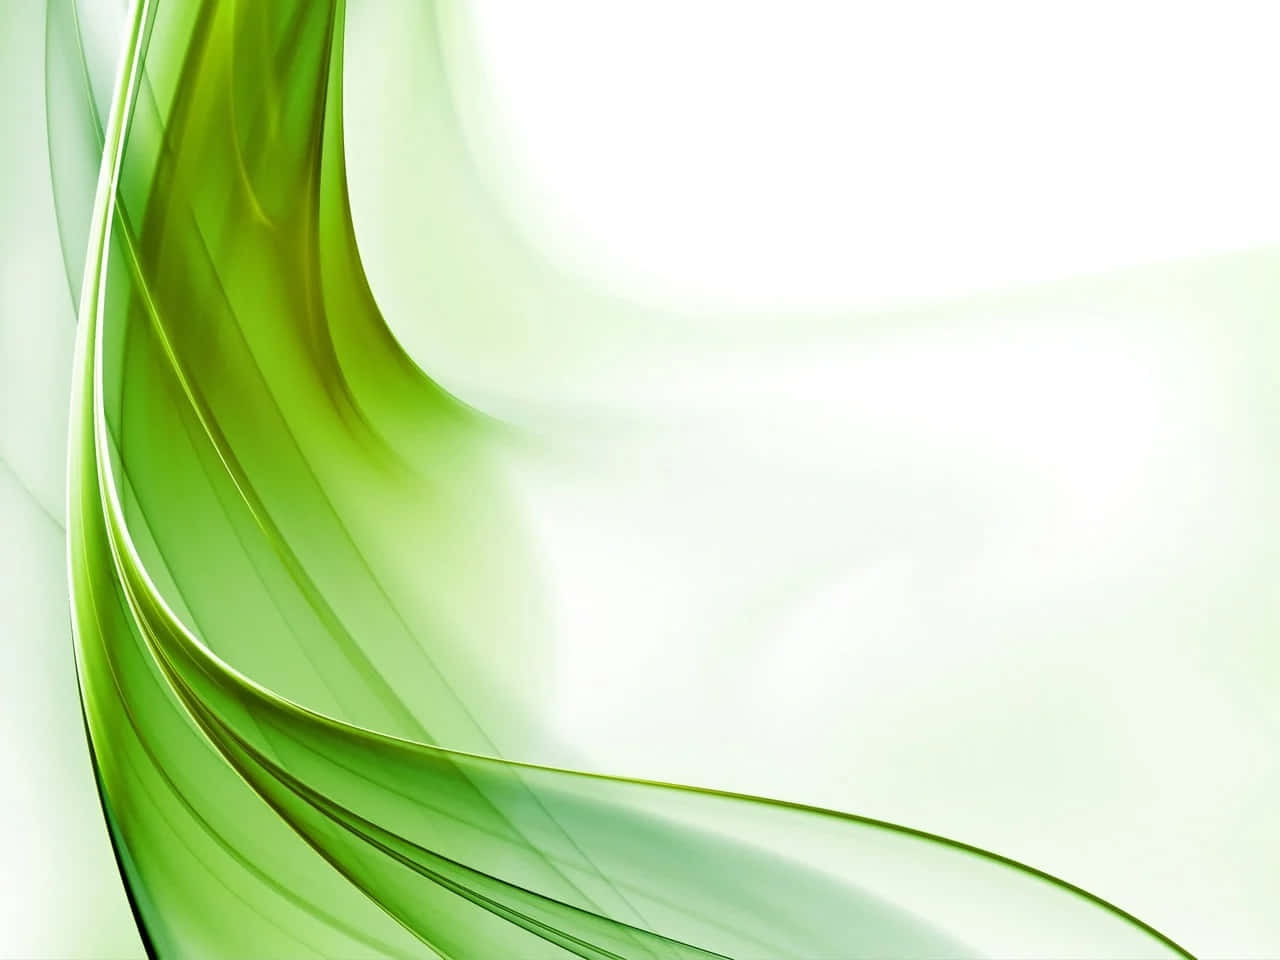 200+] Light Green Background s for FREE 